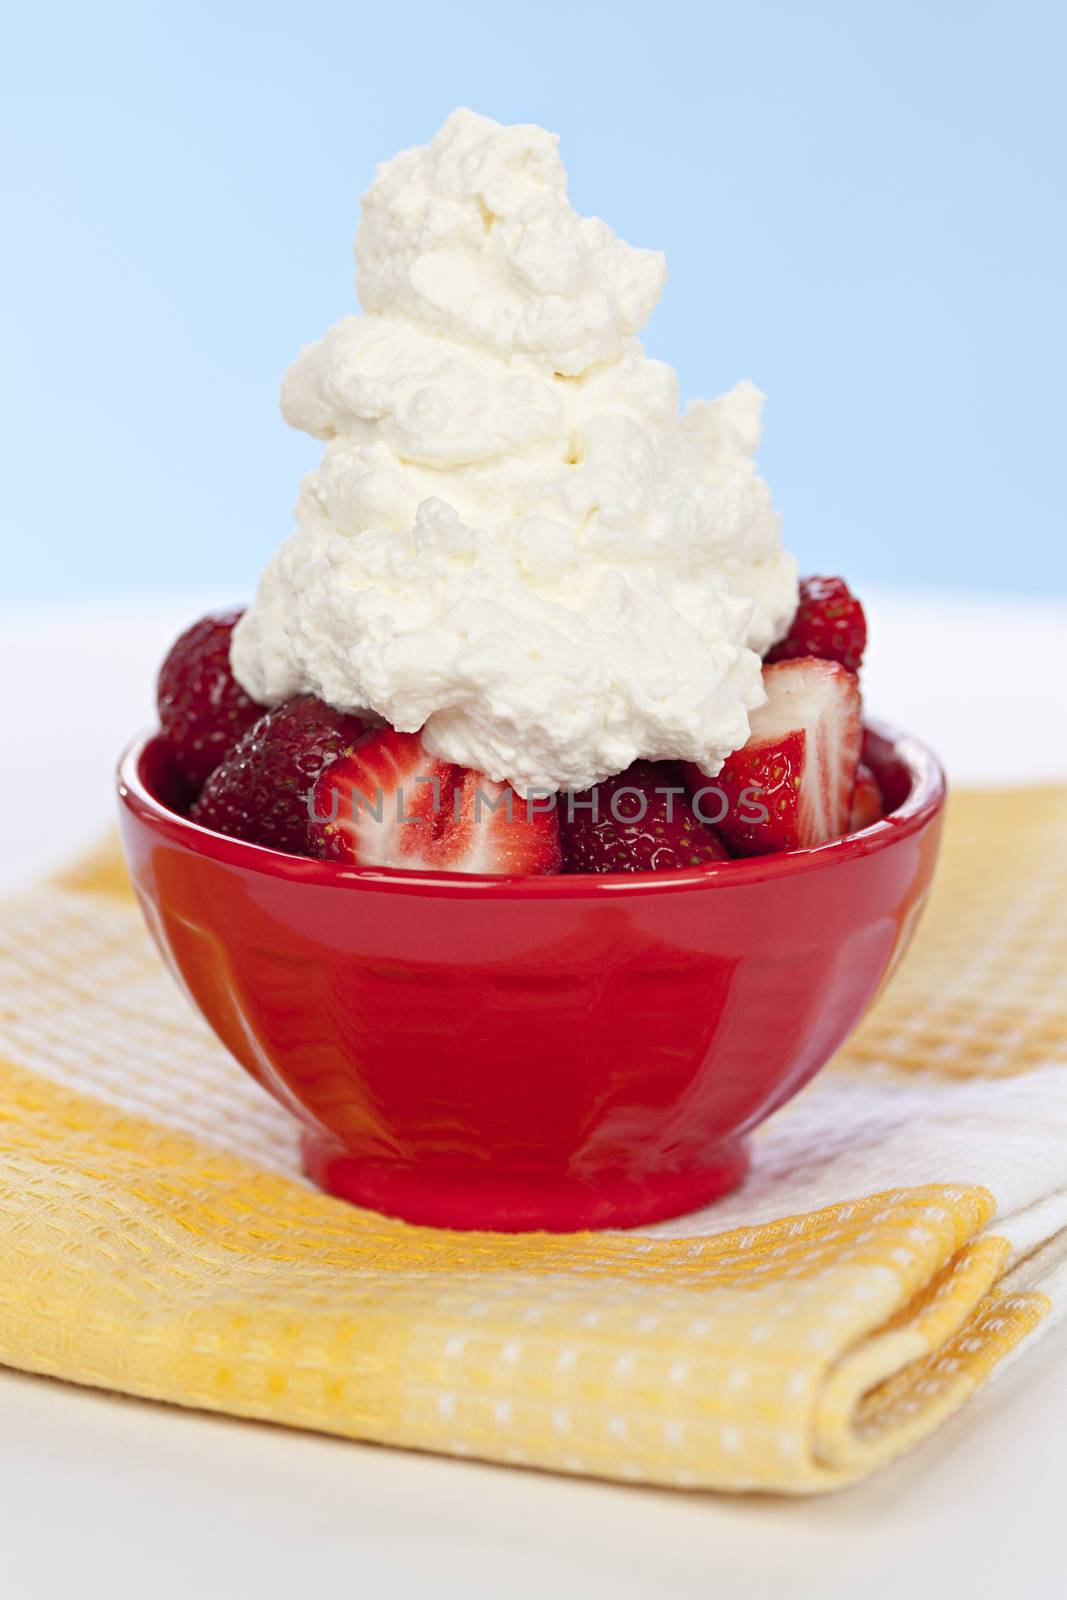 Fresh strawberries with whipped cream in red bowl